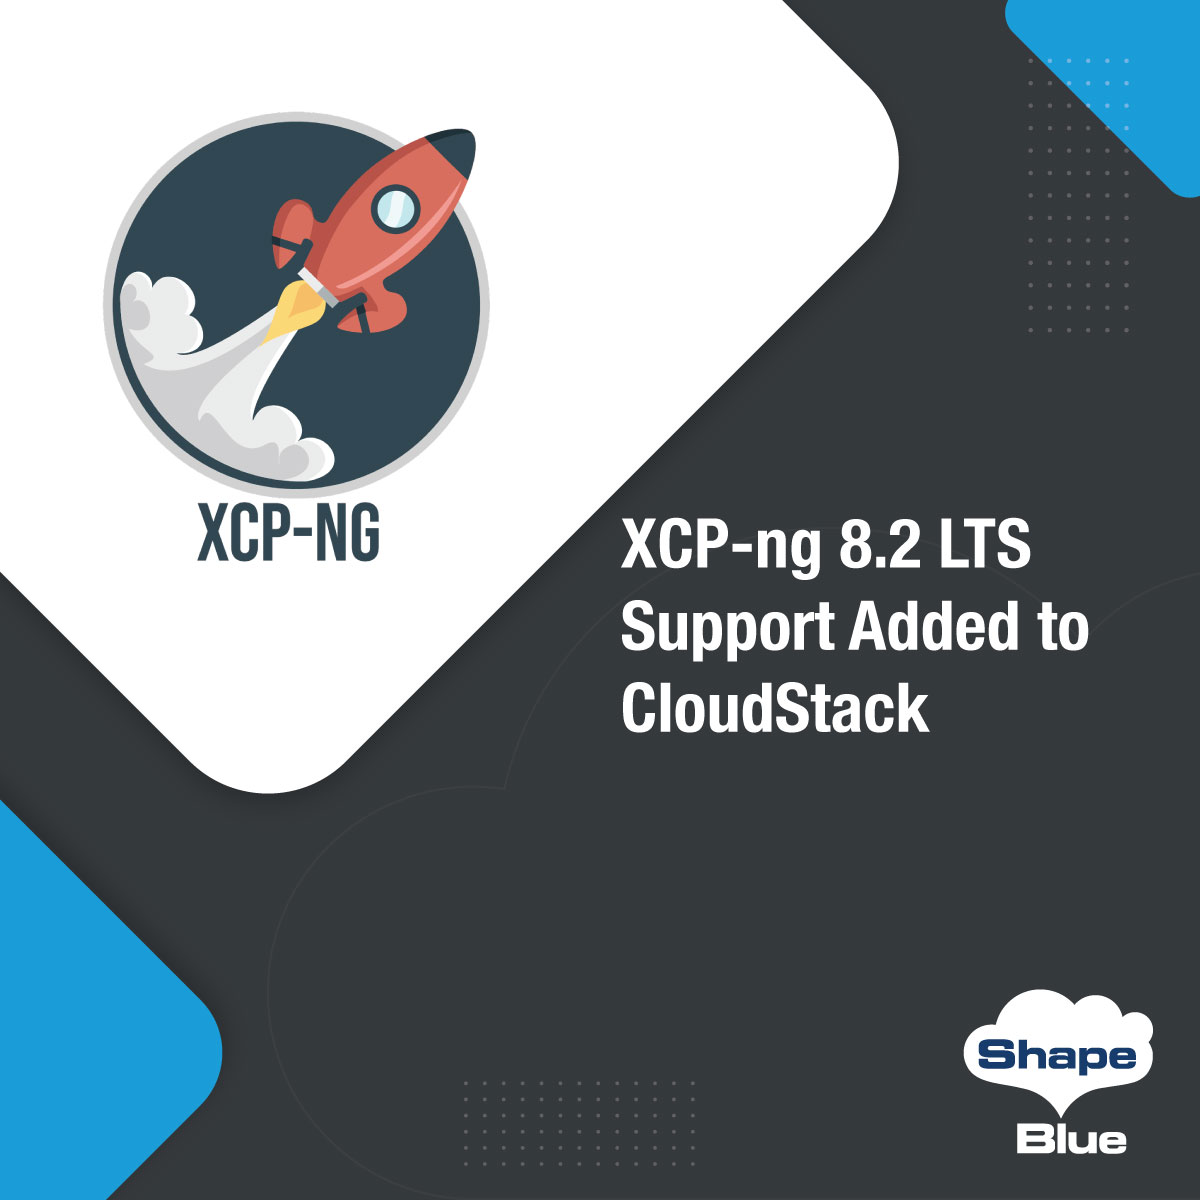 CloudStack Support for XCP-ng